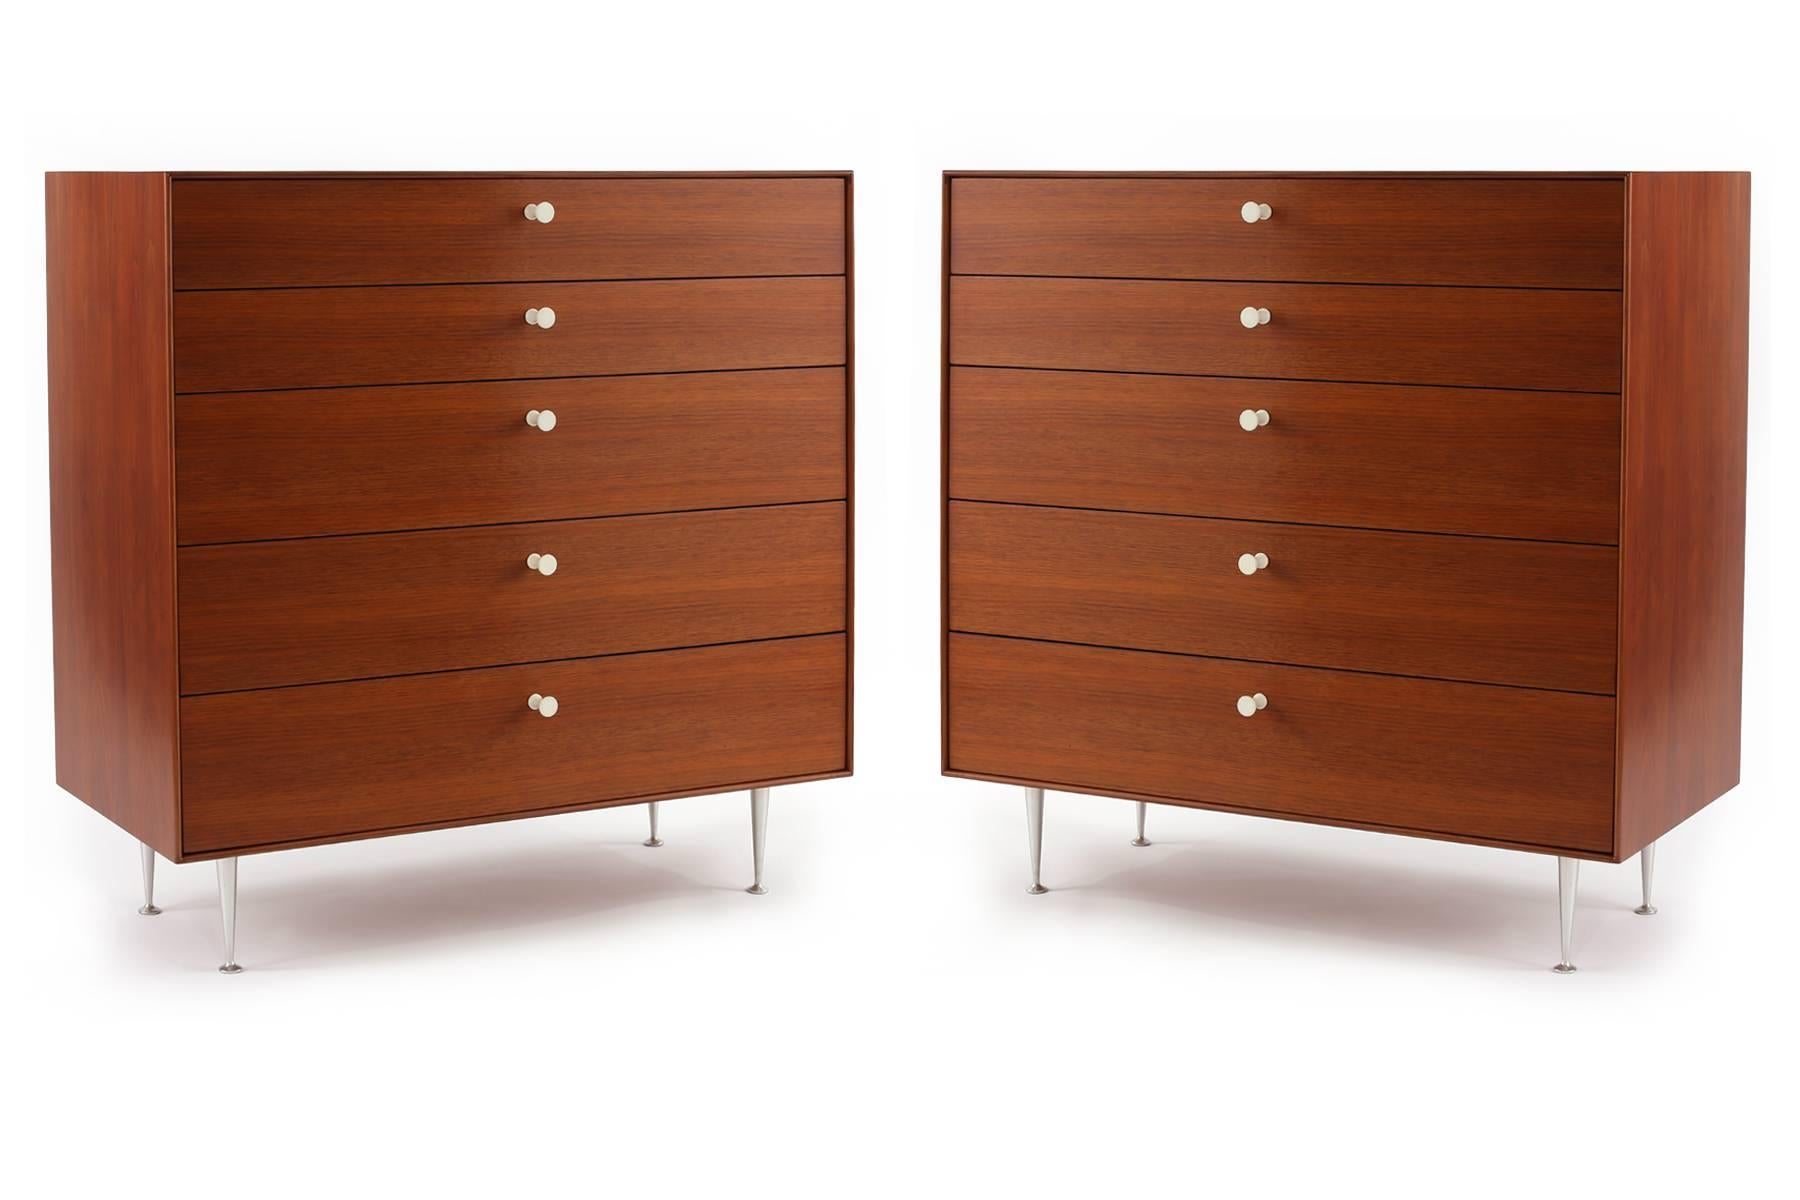 Early all original pair of George Nelson for Herman Miller thin edge chests of drawers, circa late 1950s. These five-drawer examples have combed walnut cases and drawer fronts with hourglass porcelain pulls and iconic tapered steel legs. Newly